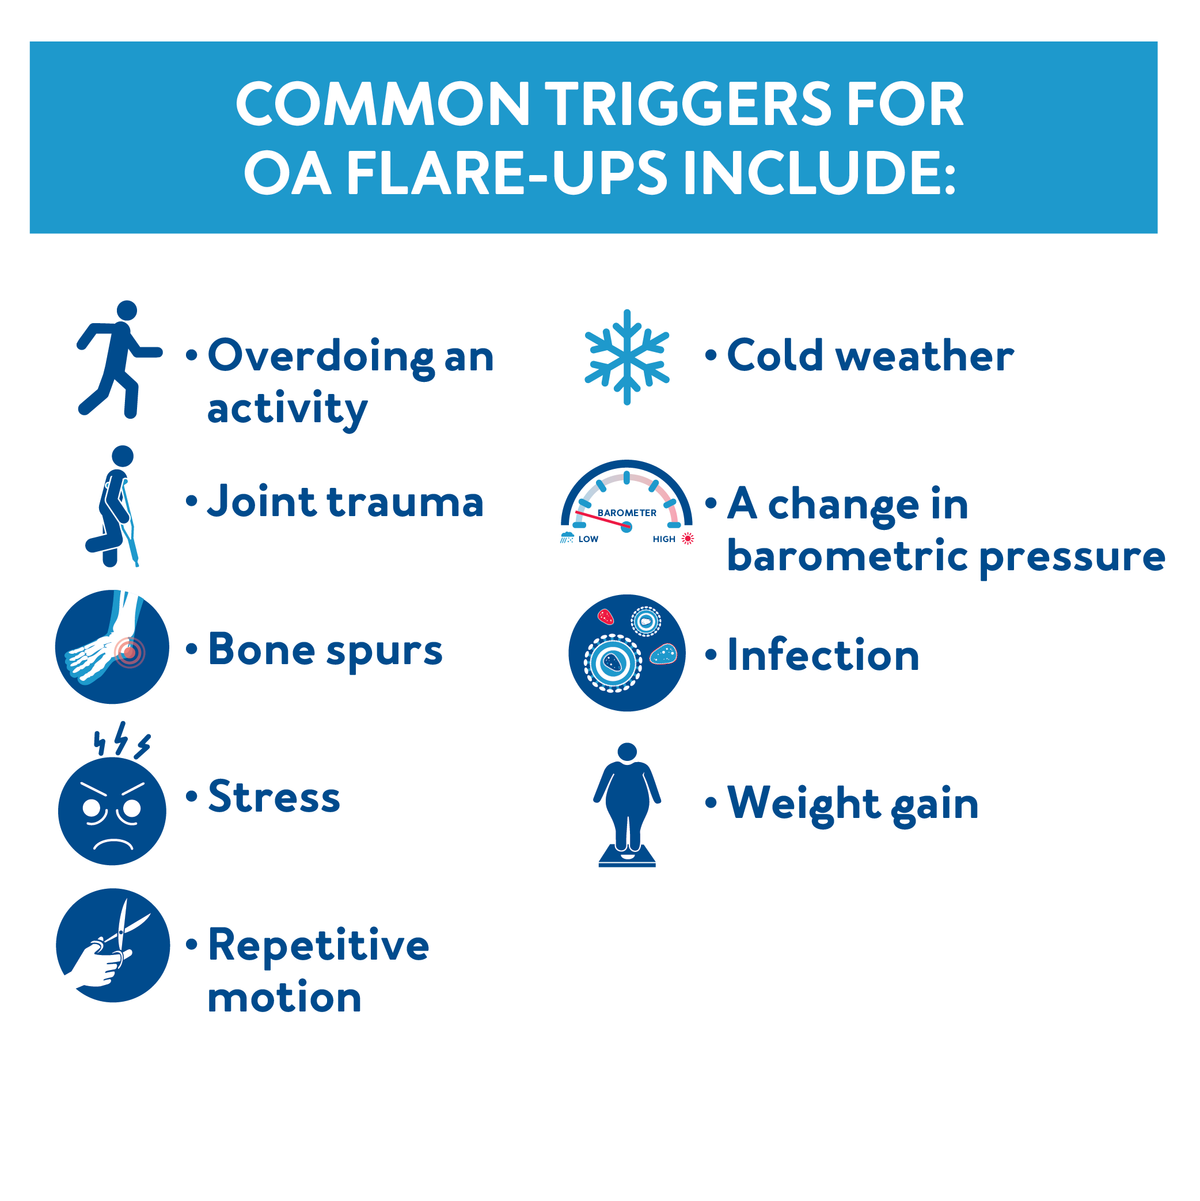 Common triggers for OA flare-ups includes : Further details are provided next to